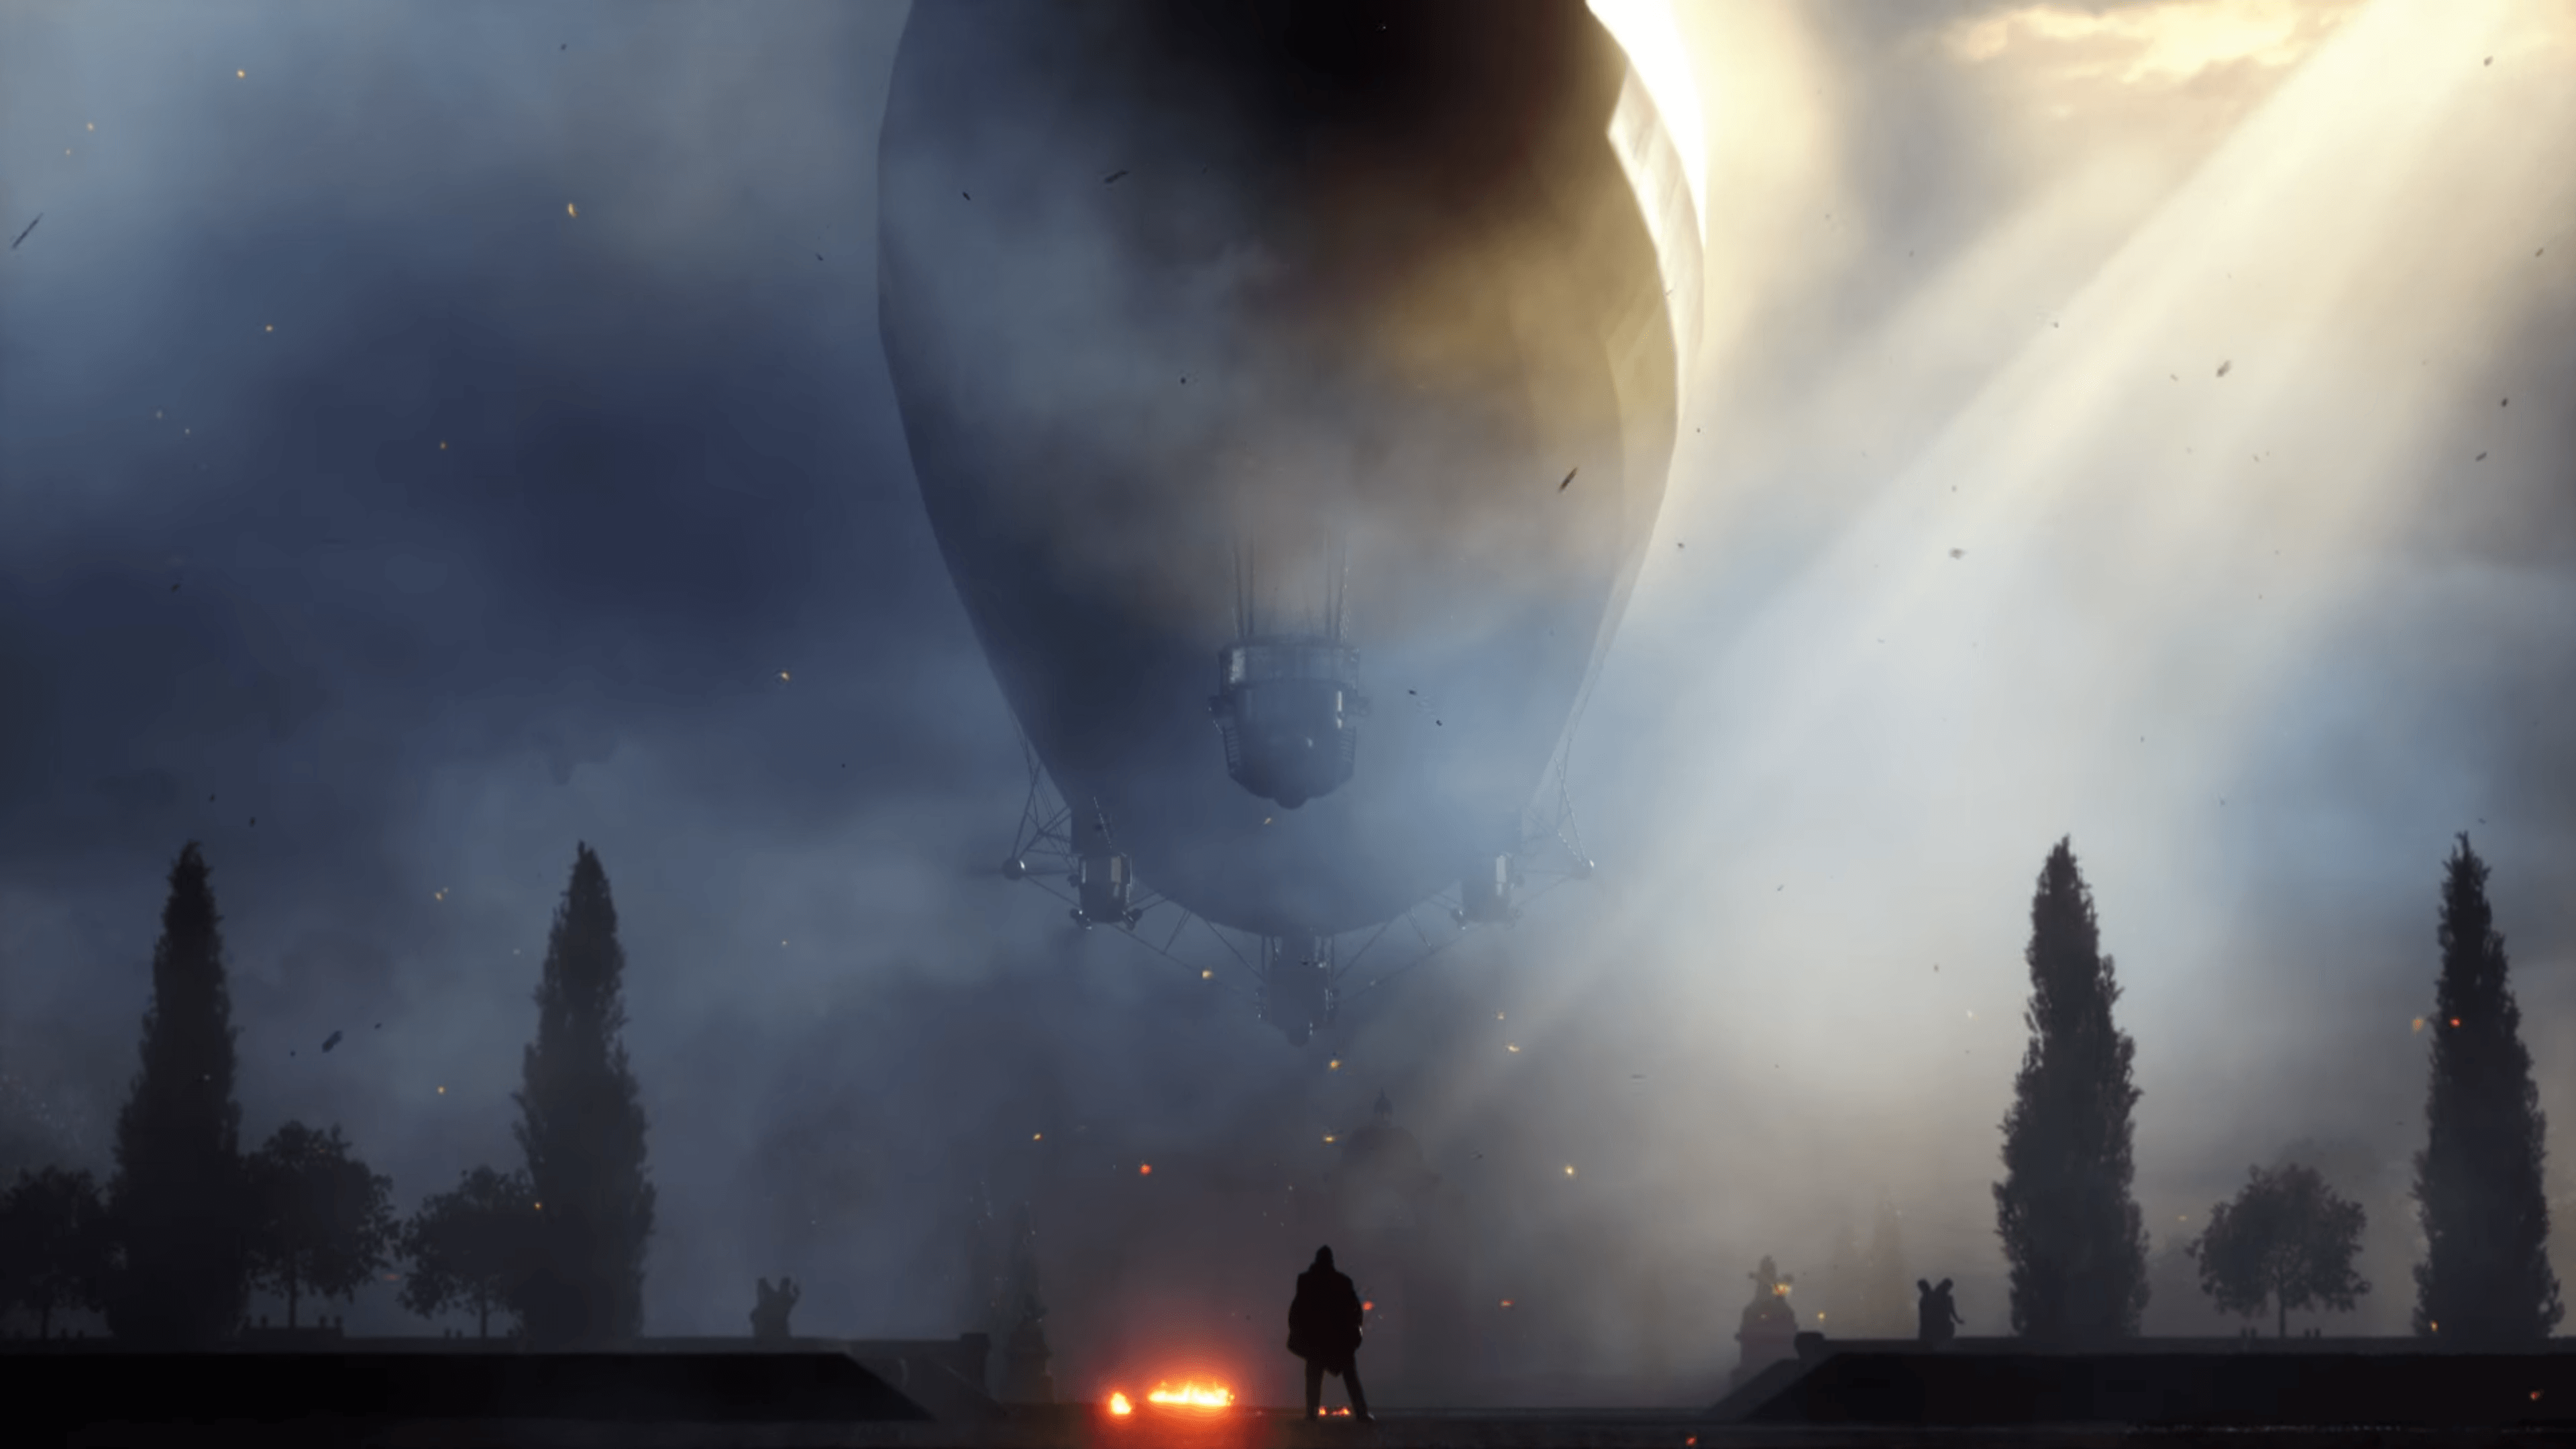 I thought the blimp scene in the BF1 trailer would be an awesome